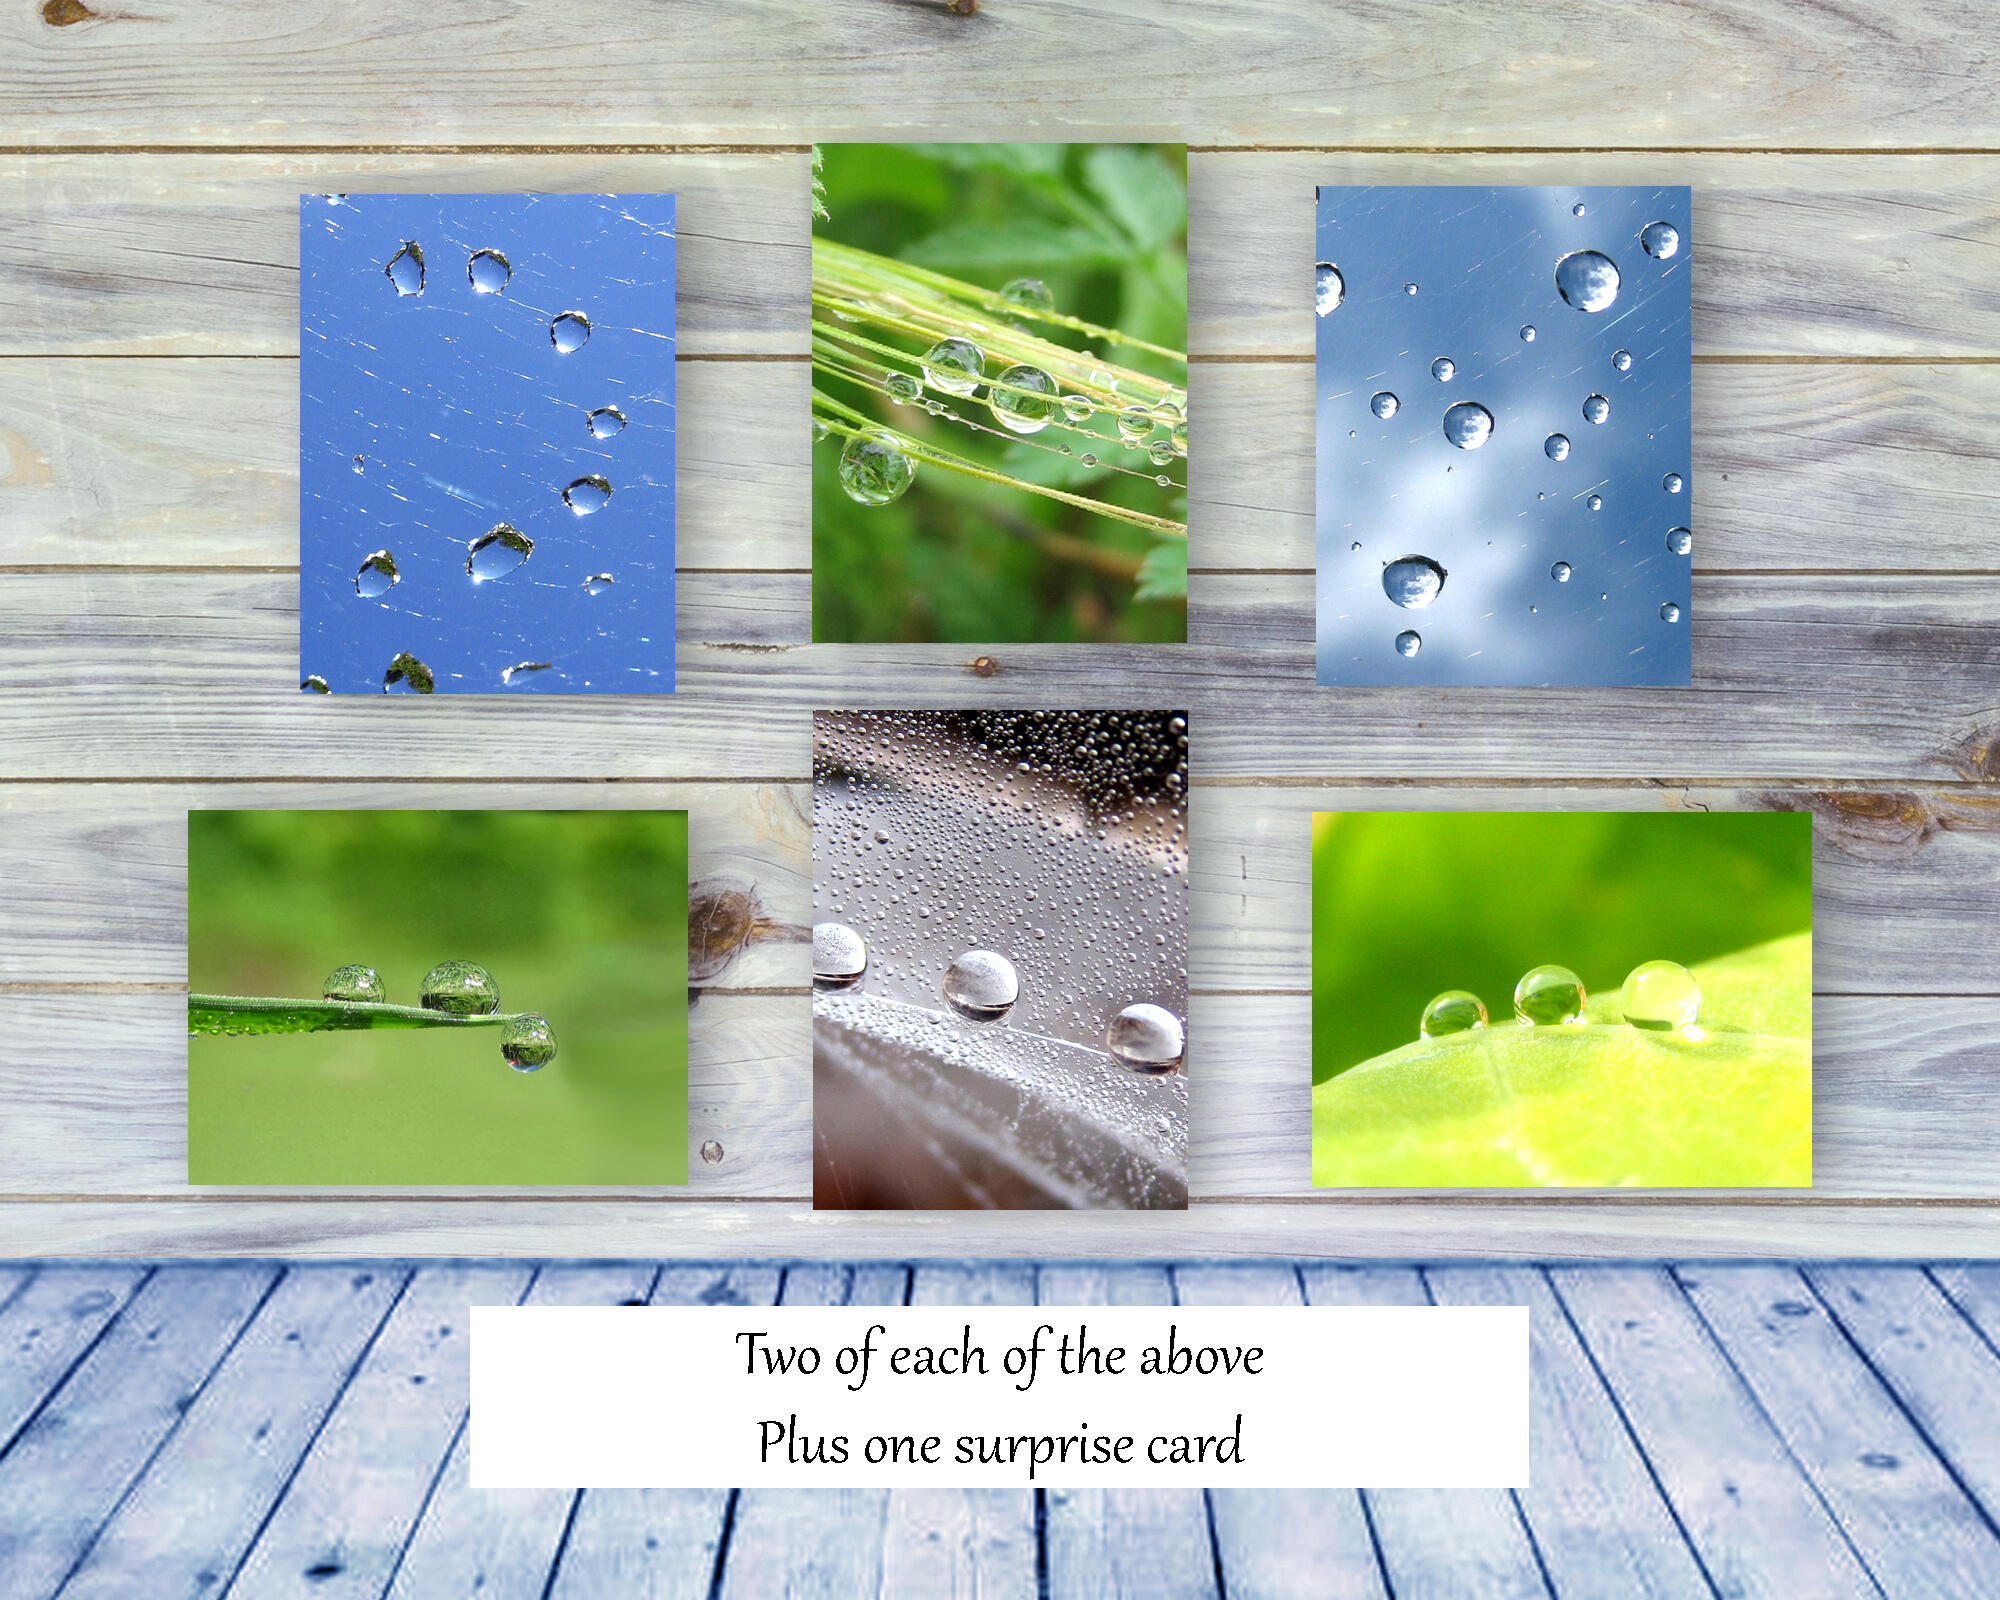 Dew Drops III - Colorful, botanical, greeting card collection by The Poetry of Nature, Stories in nature photo cards with poems. Boxed Set Baker's Dozen